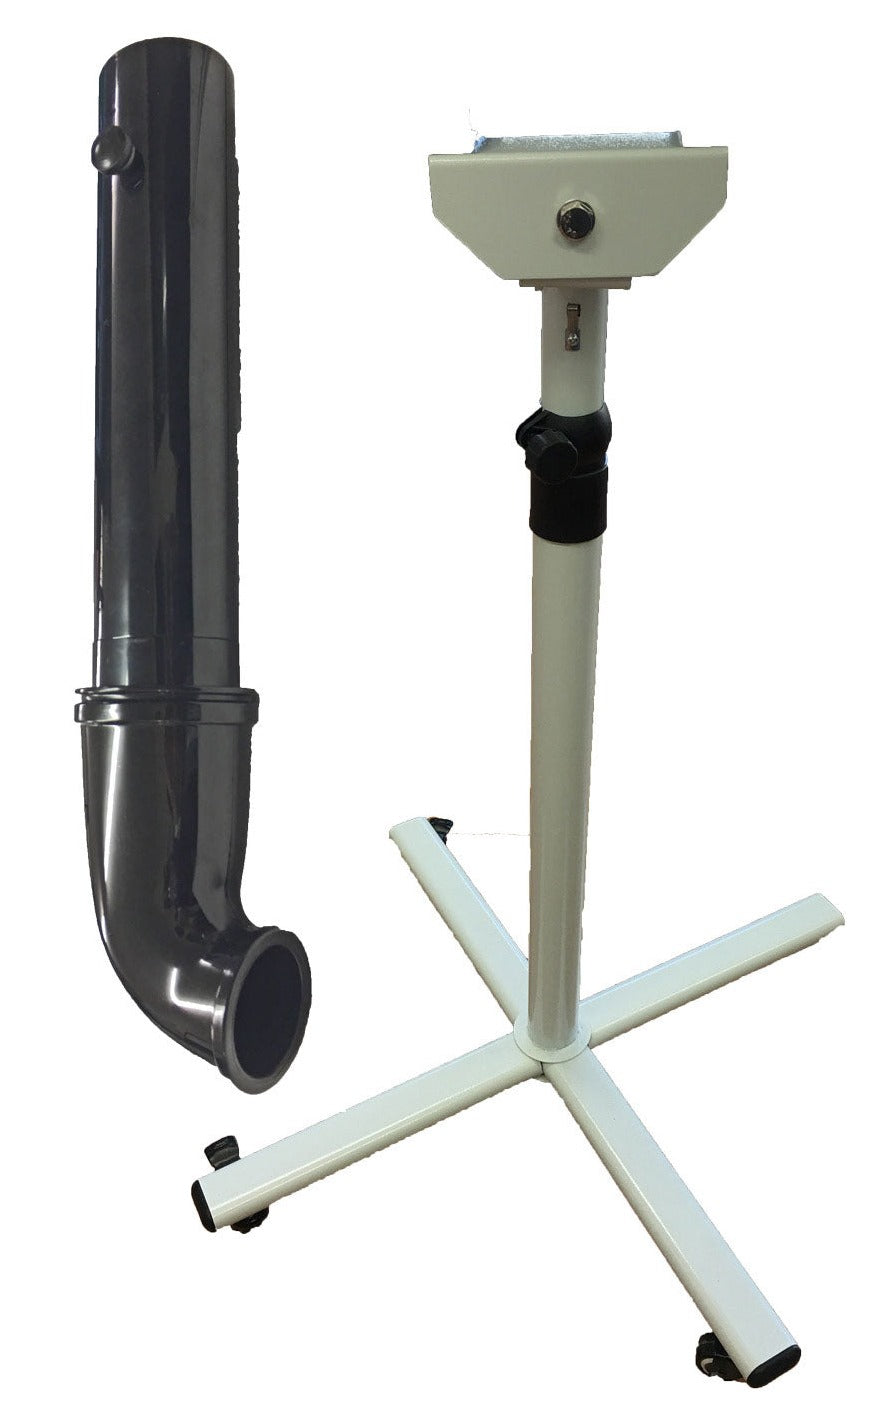 Stand with Hands-Free Rigid Tube to Fit Single Motor Dryer - Animal House/Lazor RX Media 1 of 3